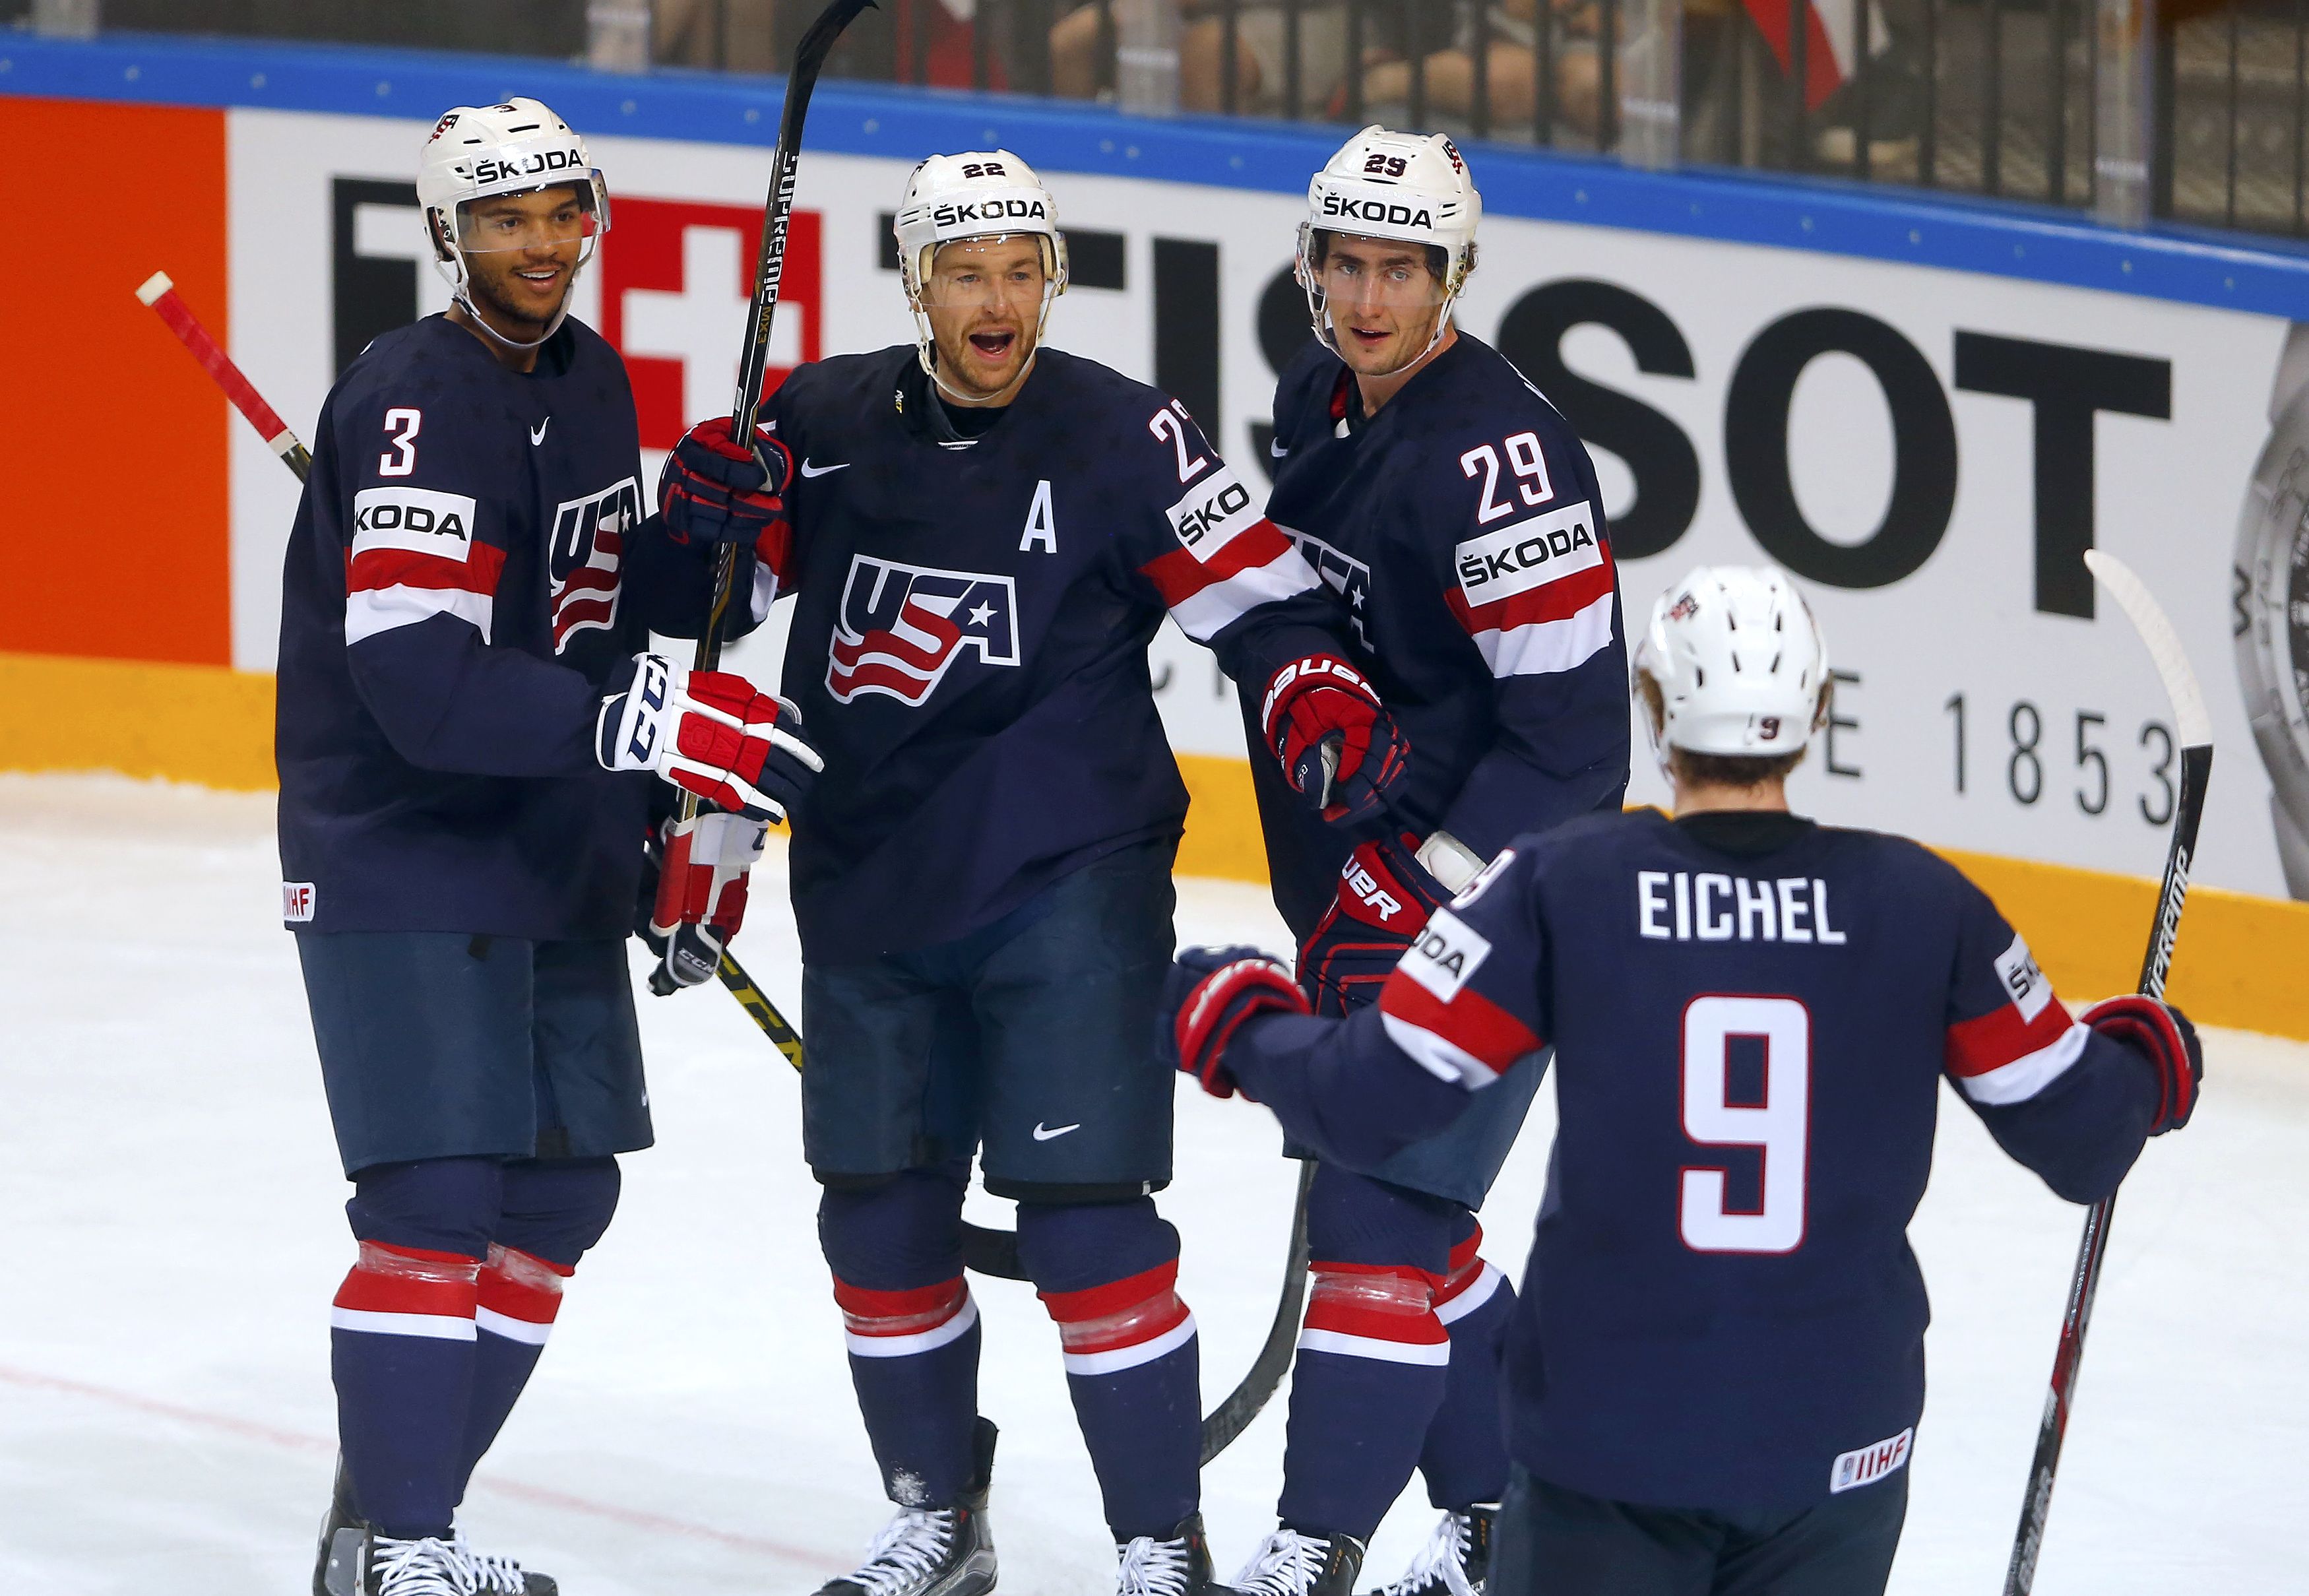 Five takeaways from Team USA’s thirdplace finish at the World Ice